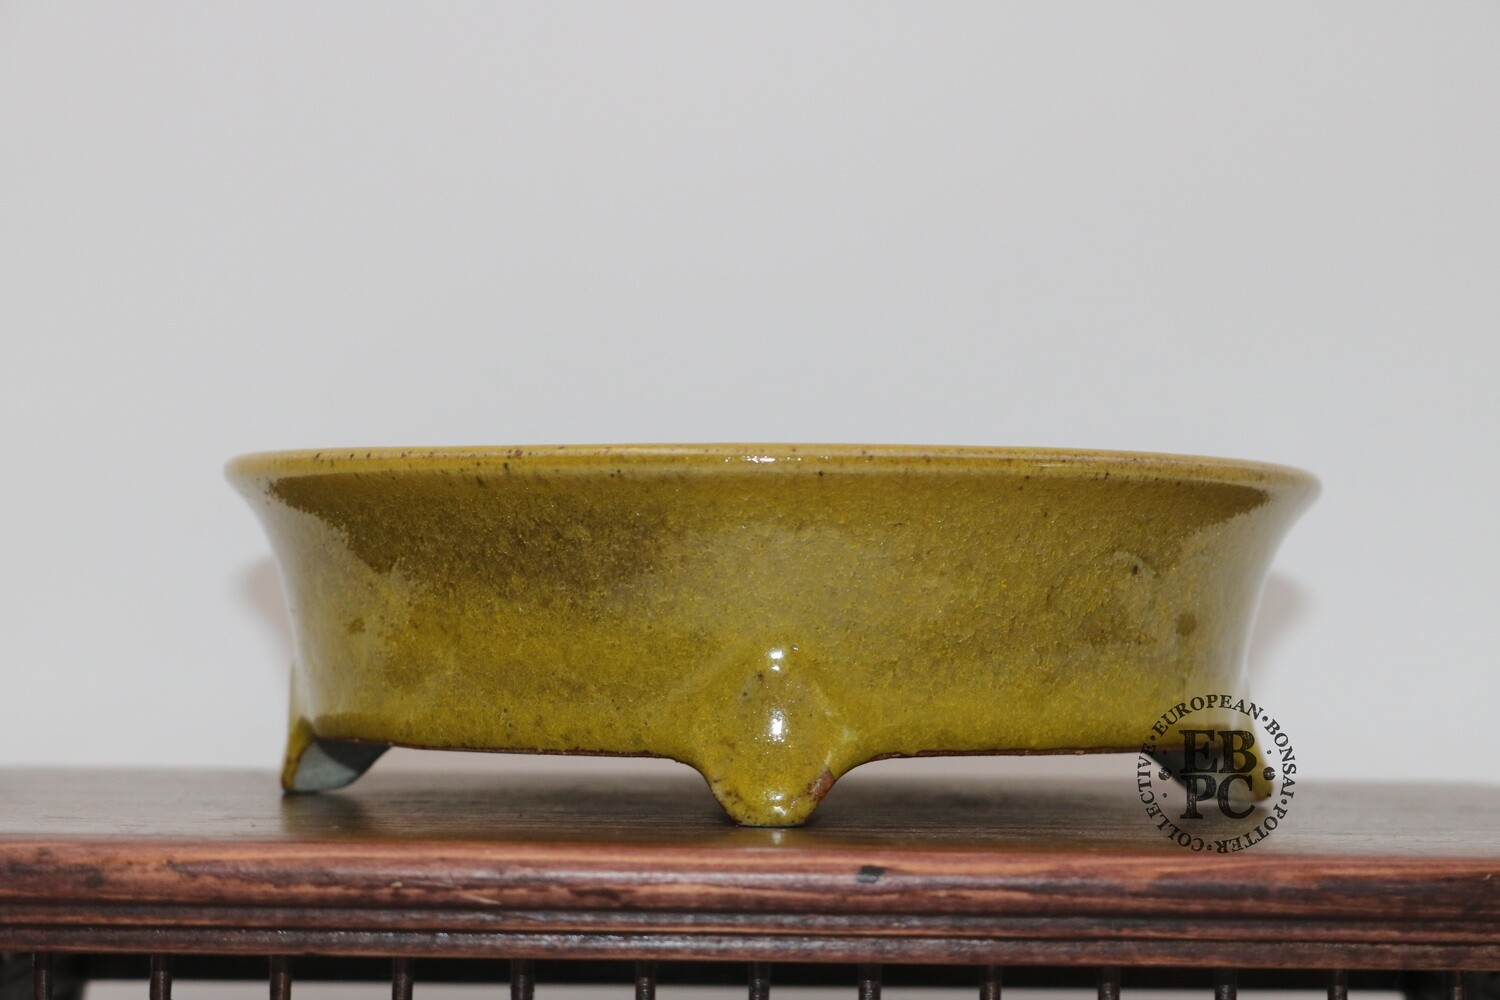 SOLD - Gramming Pots - 16.7cm; 'Sublime Yellows Range'; Carved Dragonscale design; Glazed; Wood-fired; Delicate feet; Tomas Gramming